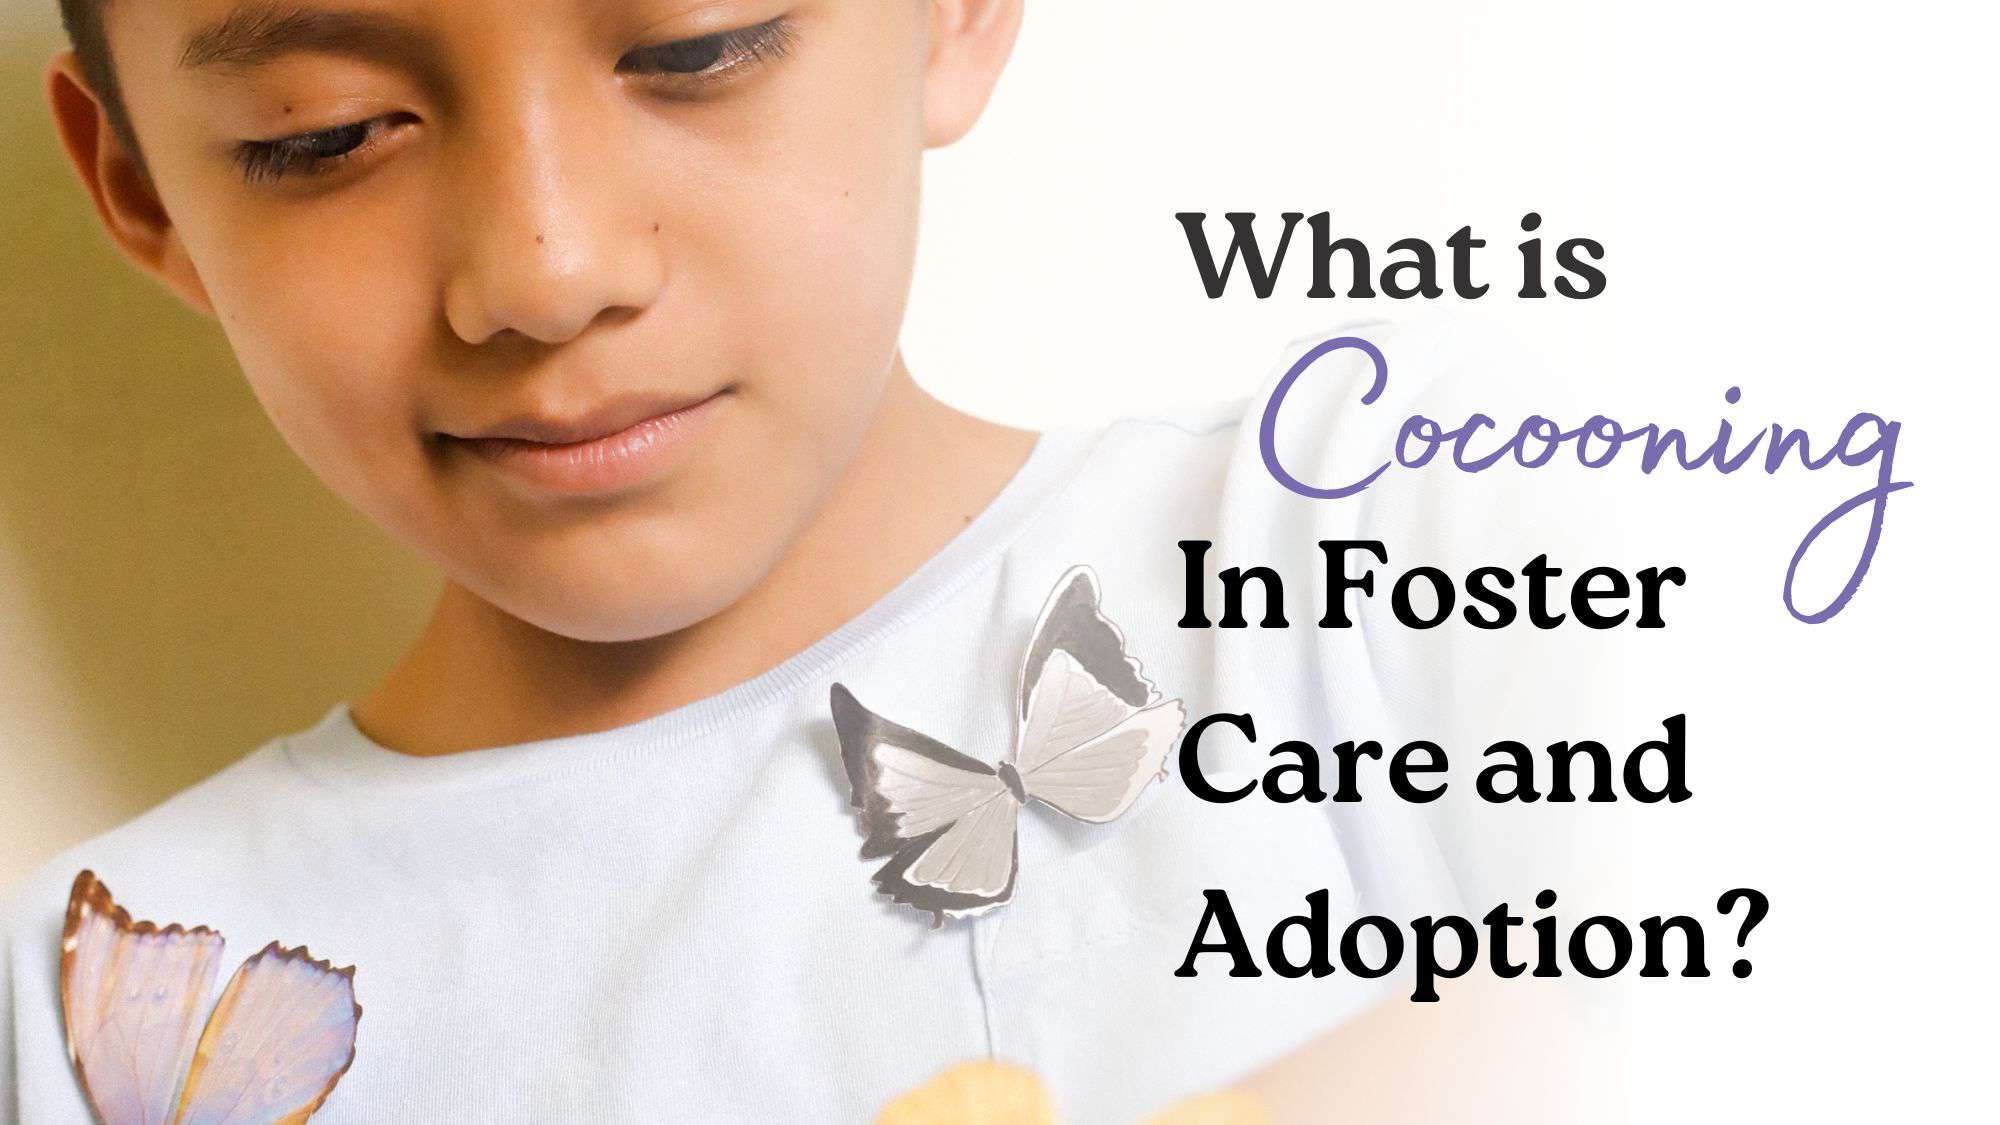 What Is Cocooning in Adoption & Foster Care? - Focus on the Family